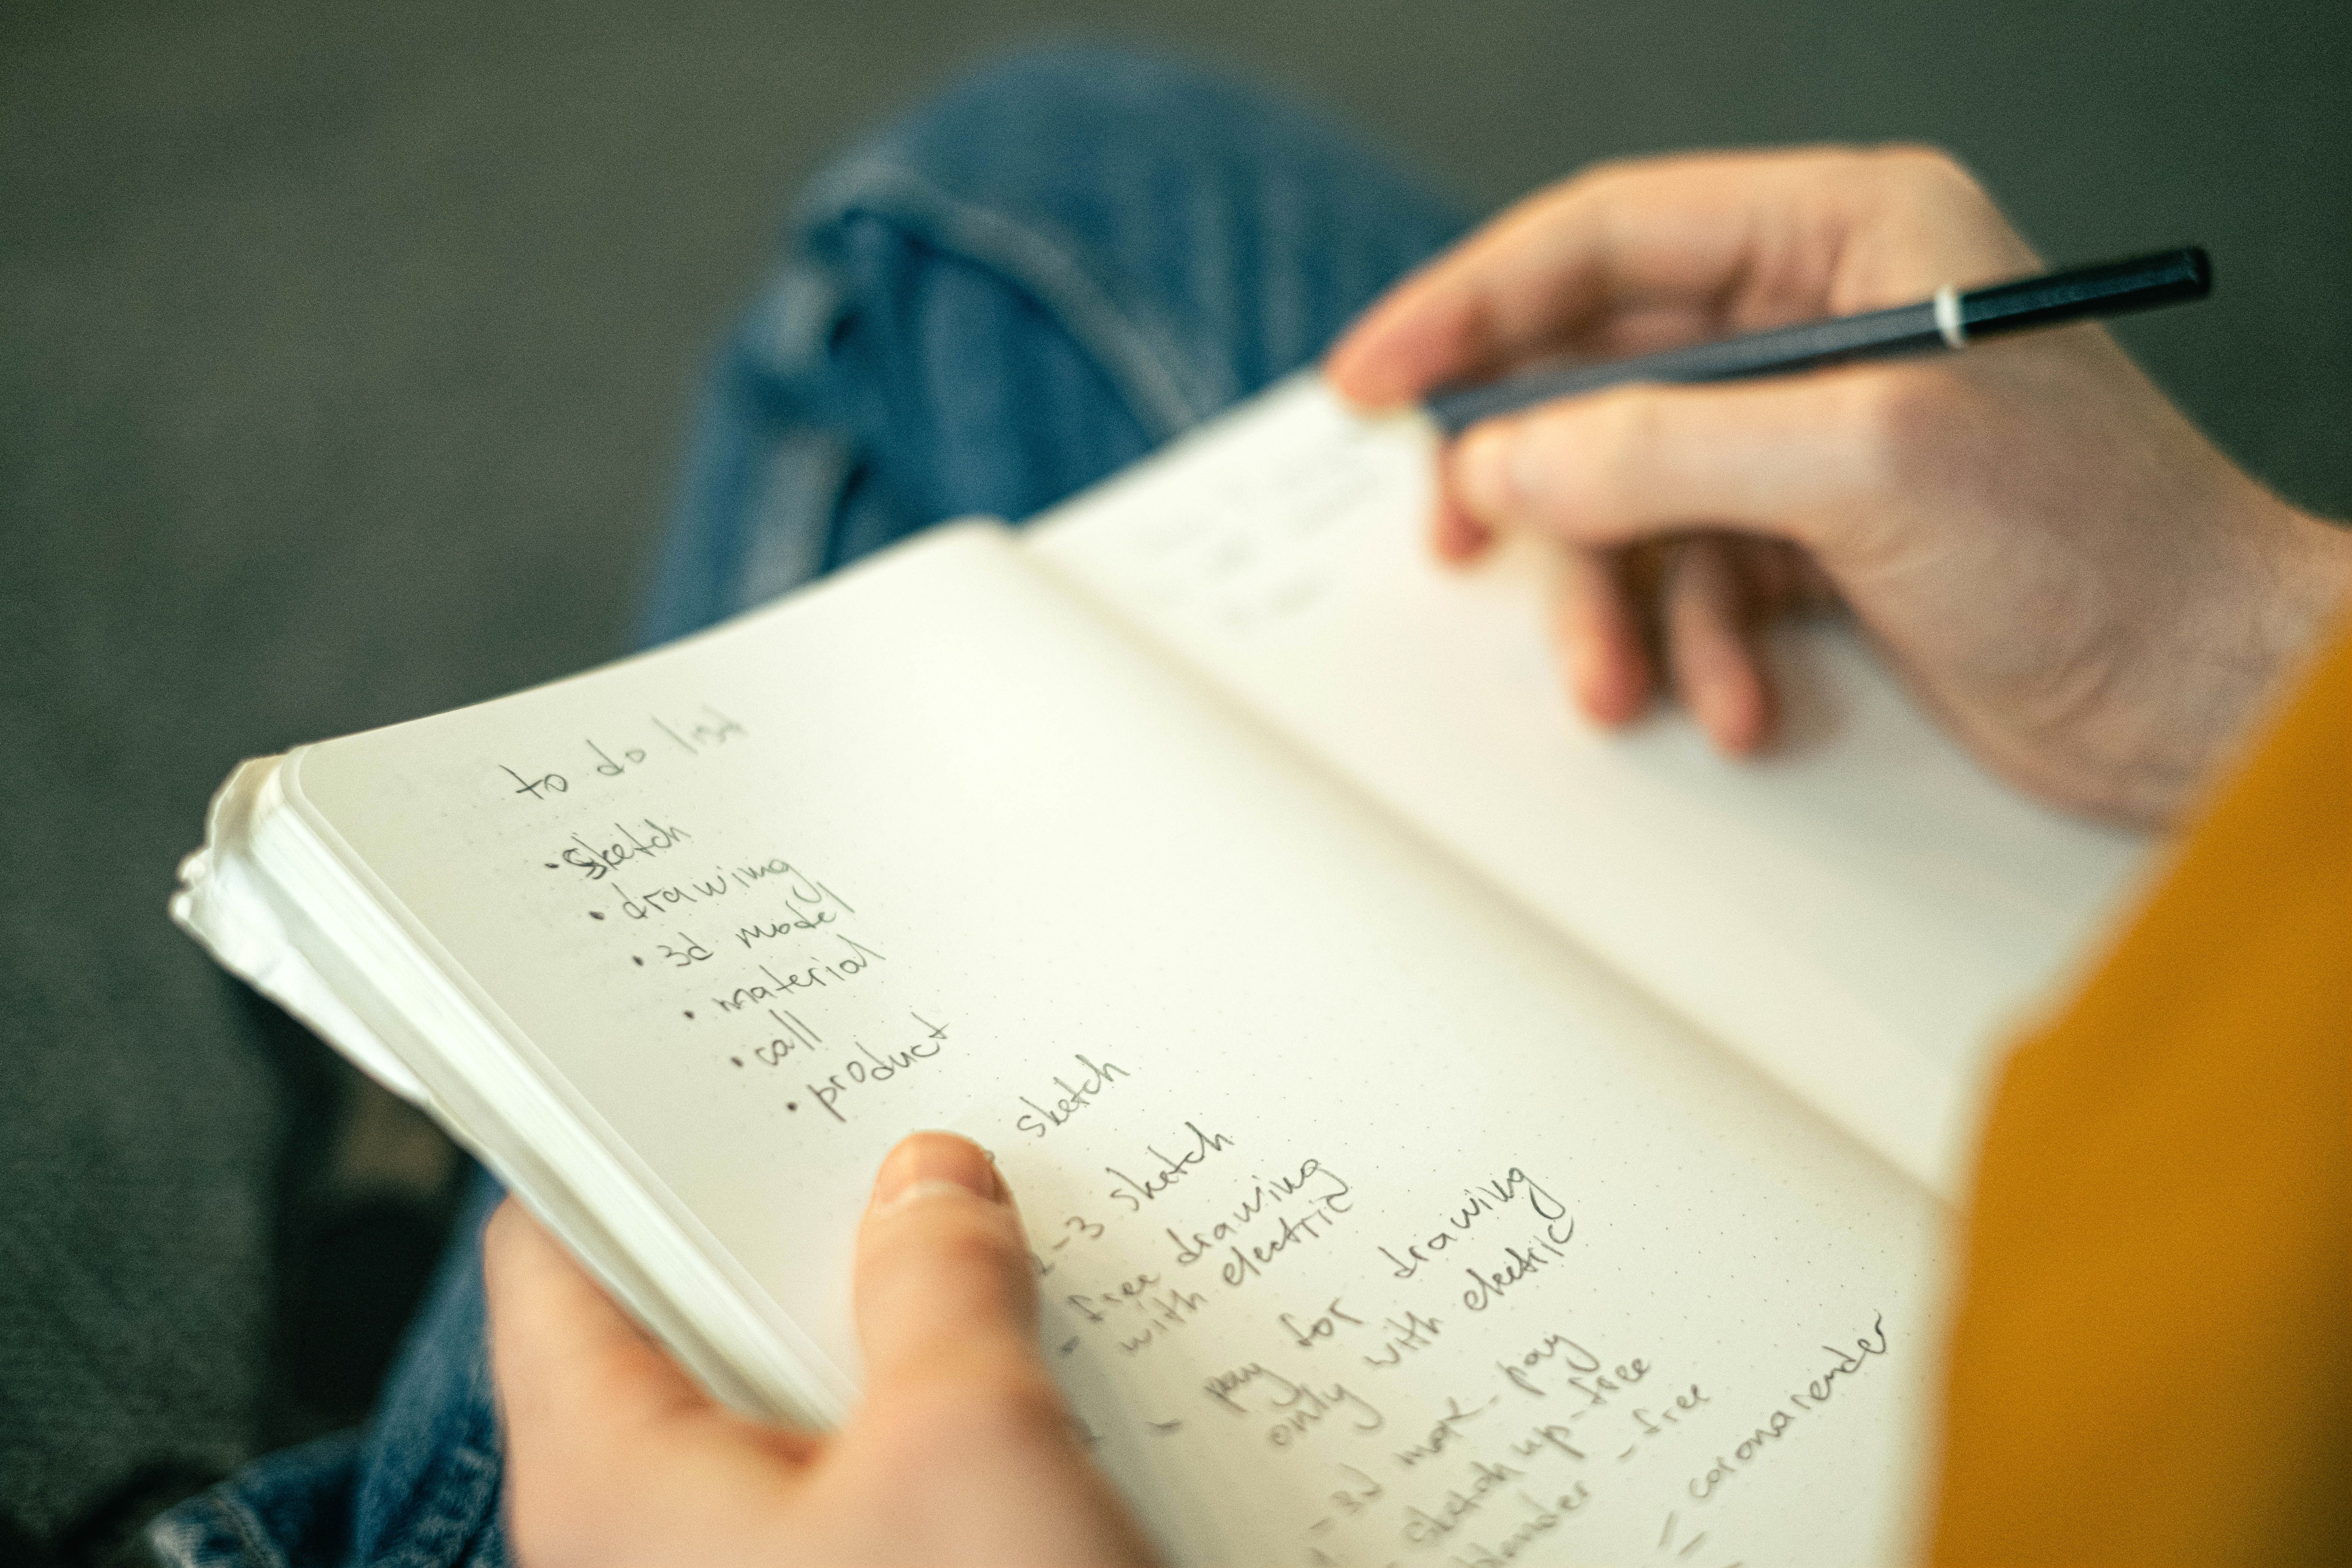 Somone trying to prioritize a list | Source: Pexels